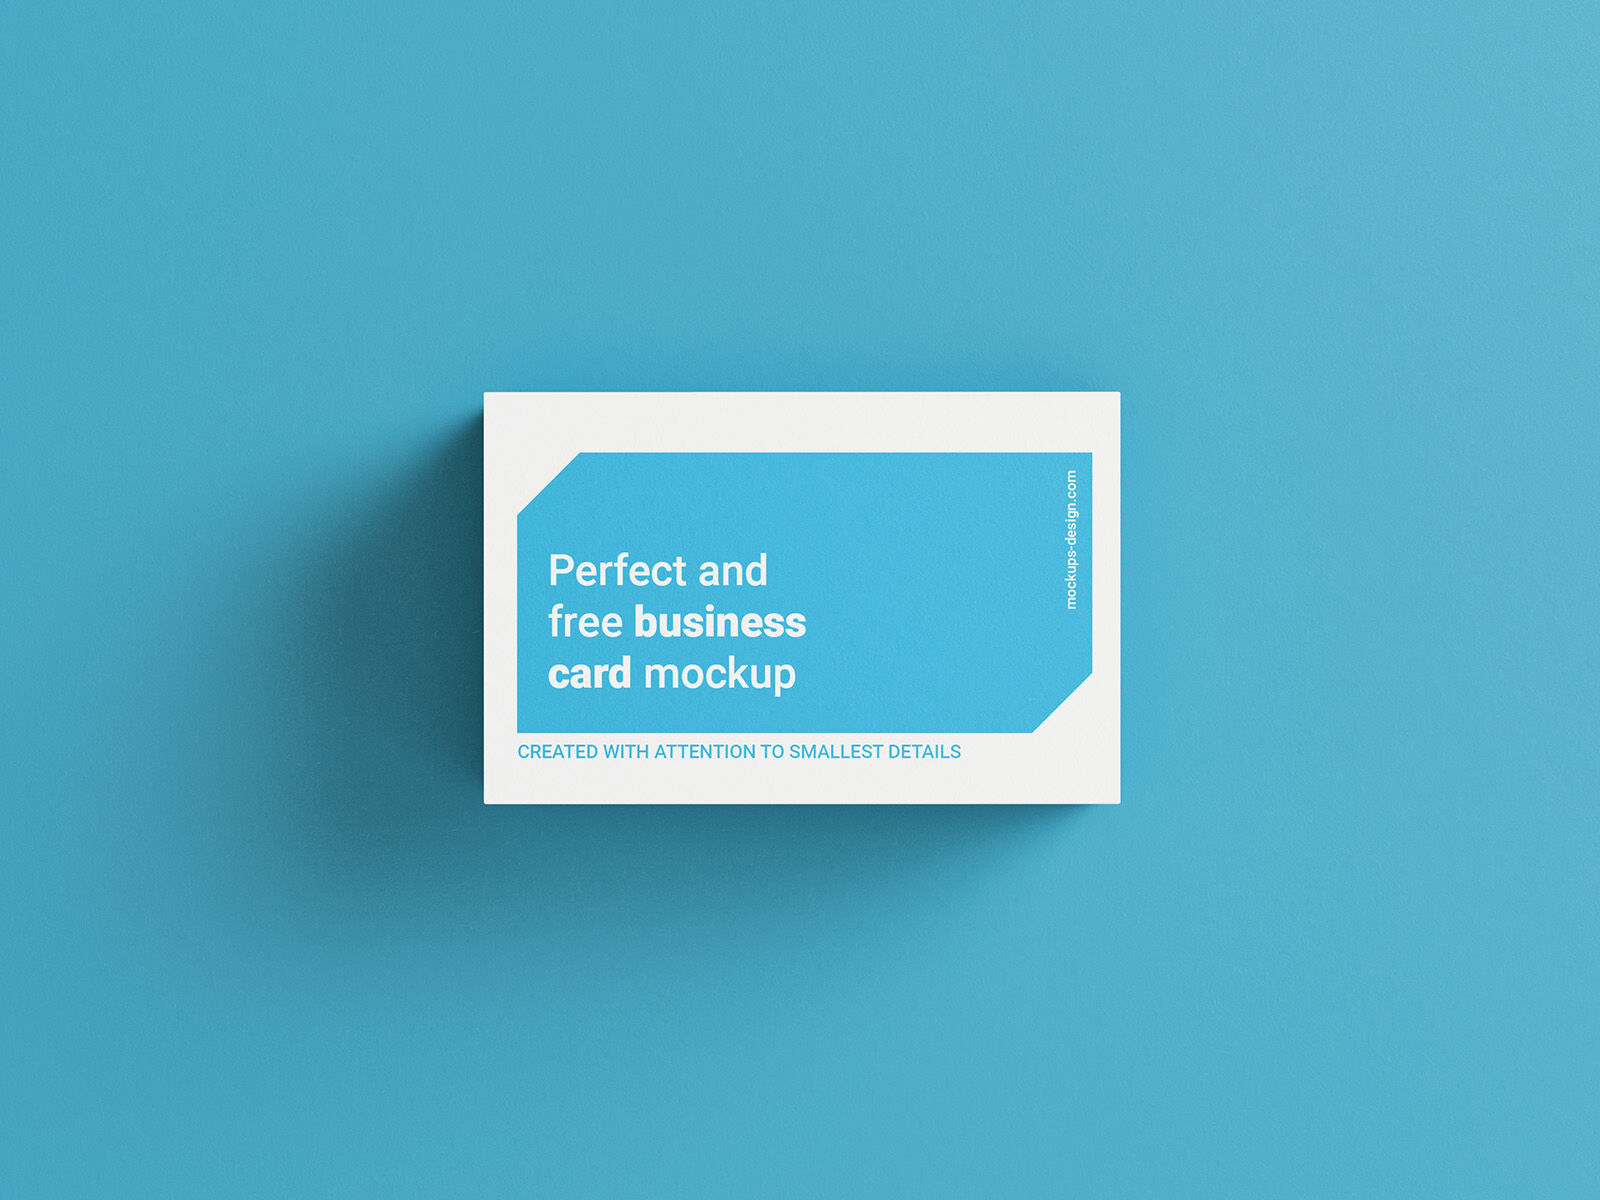 5 Business Cards Stack Mockups in Different Views FREE PSD